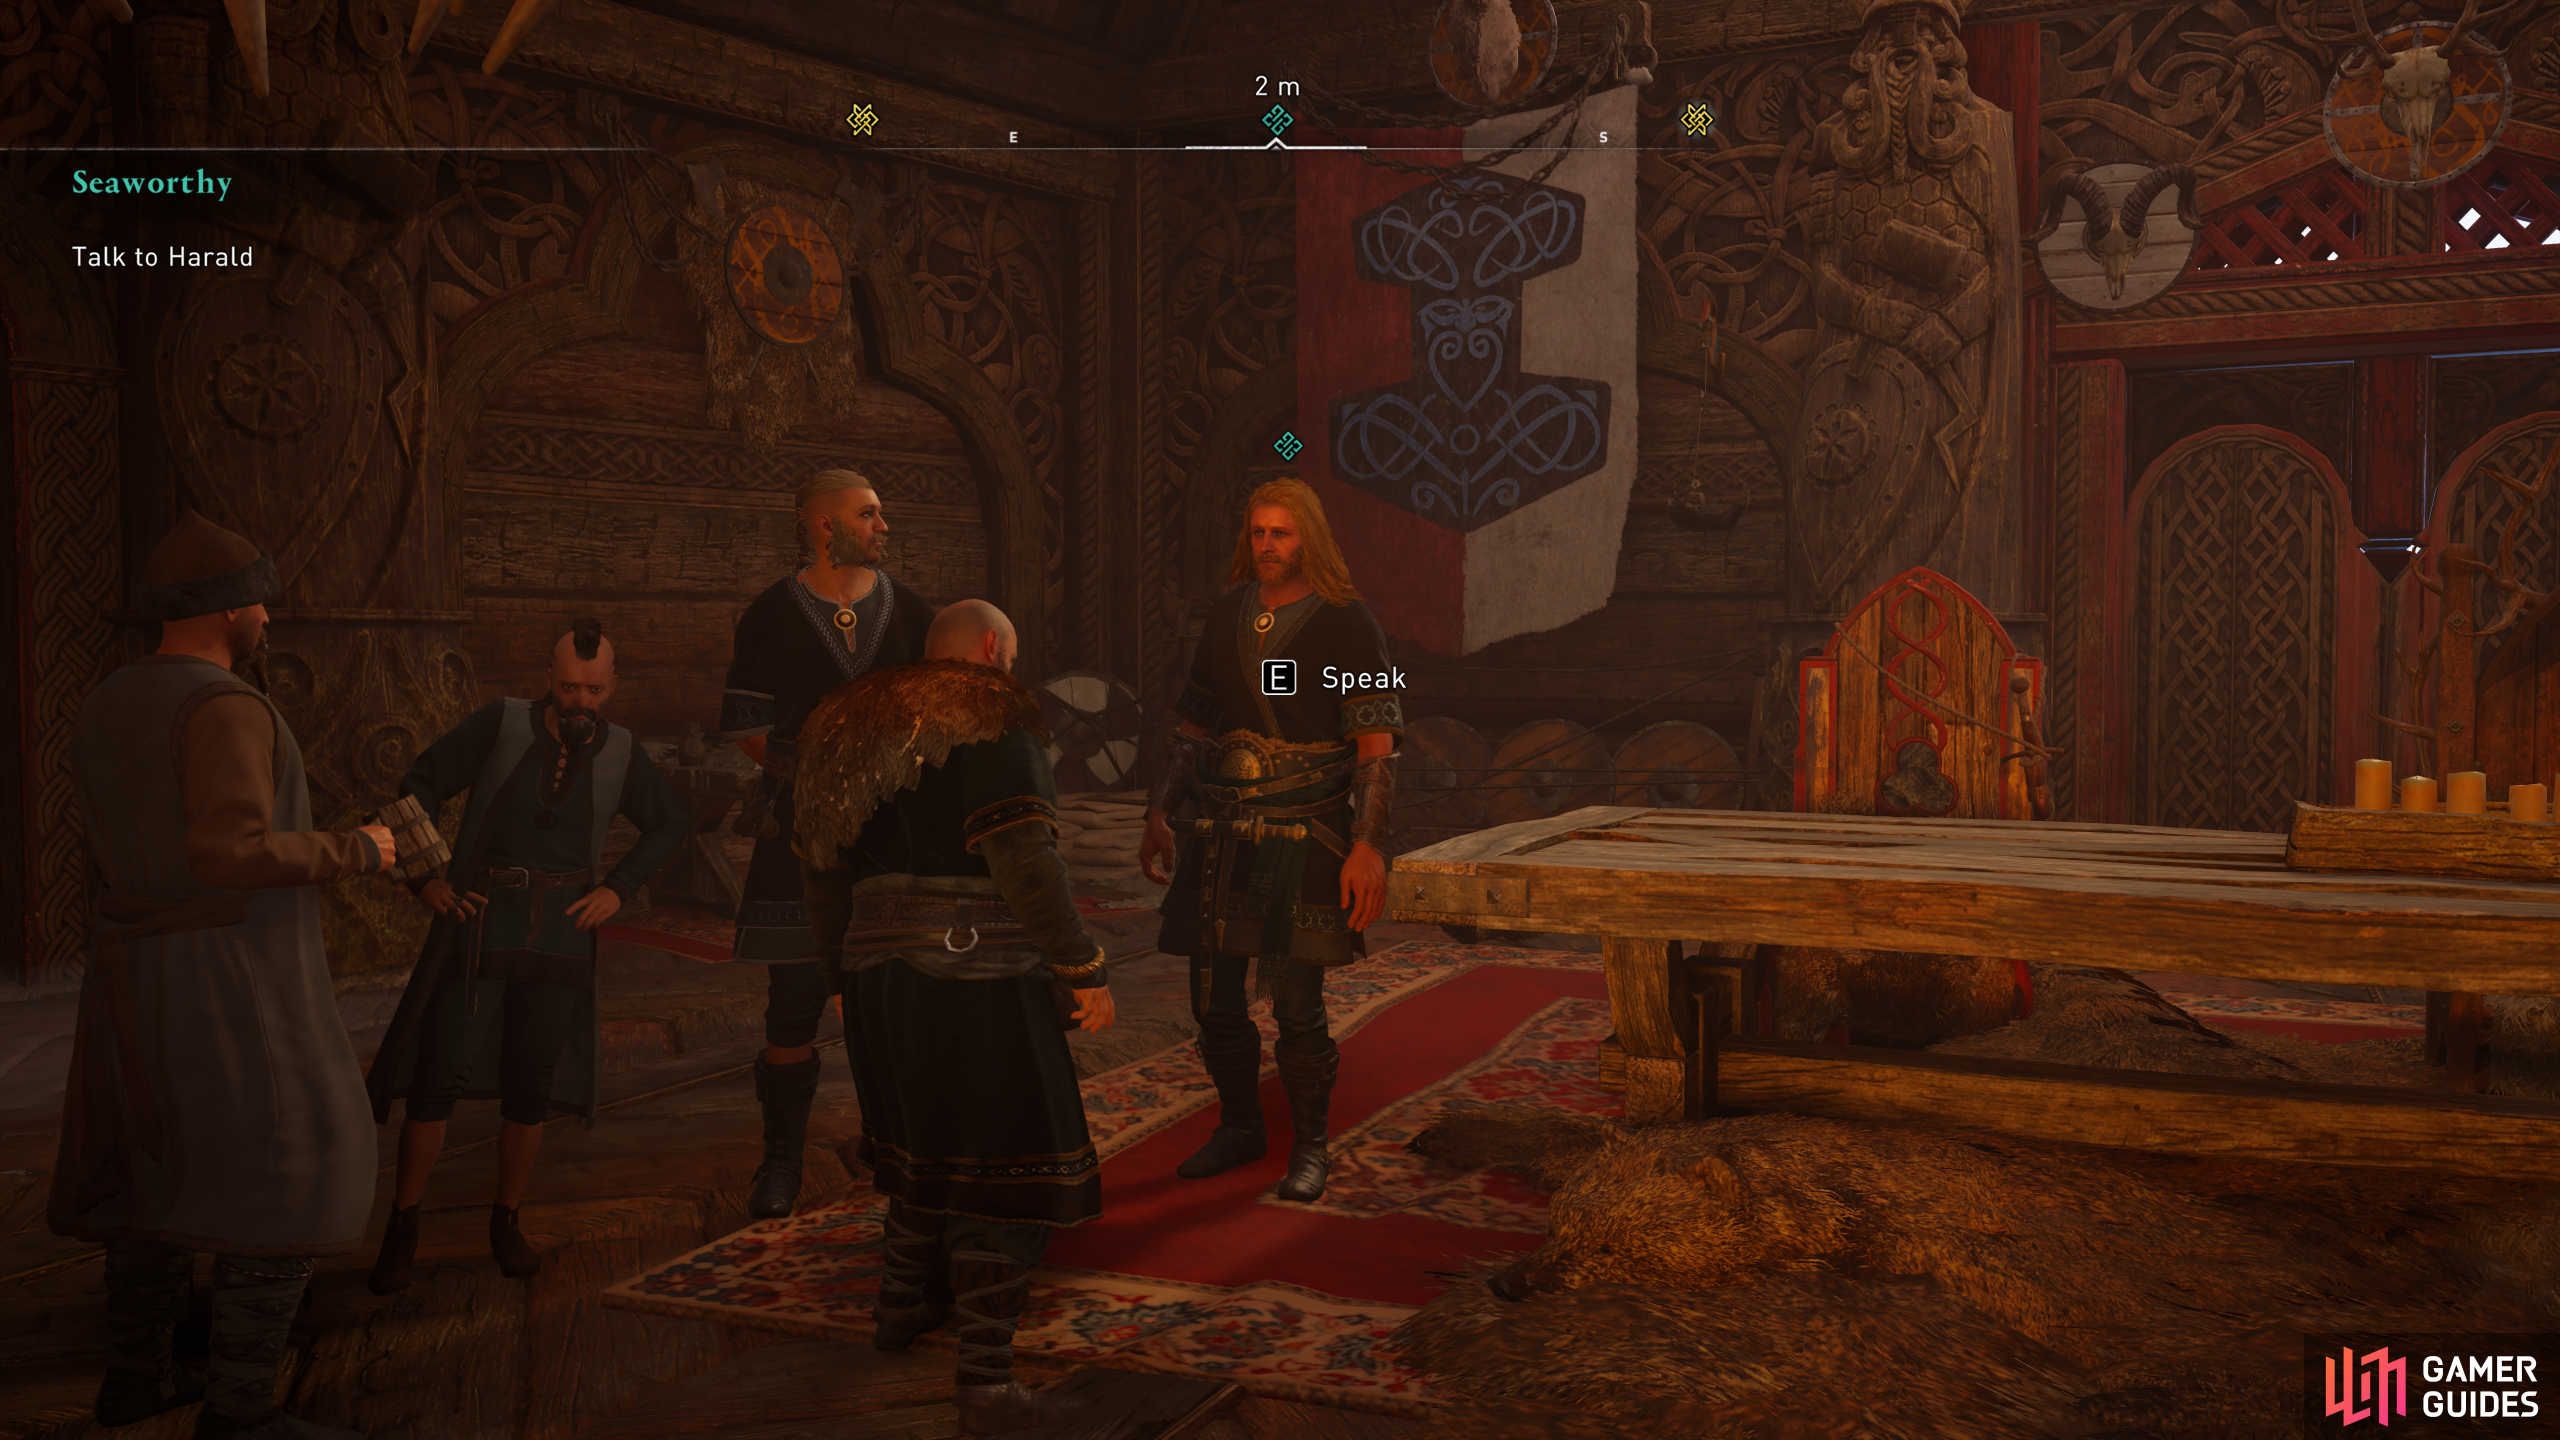 Speak with King Harald when youre ready to leave the longhouse.